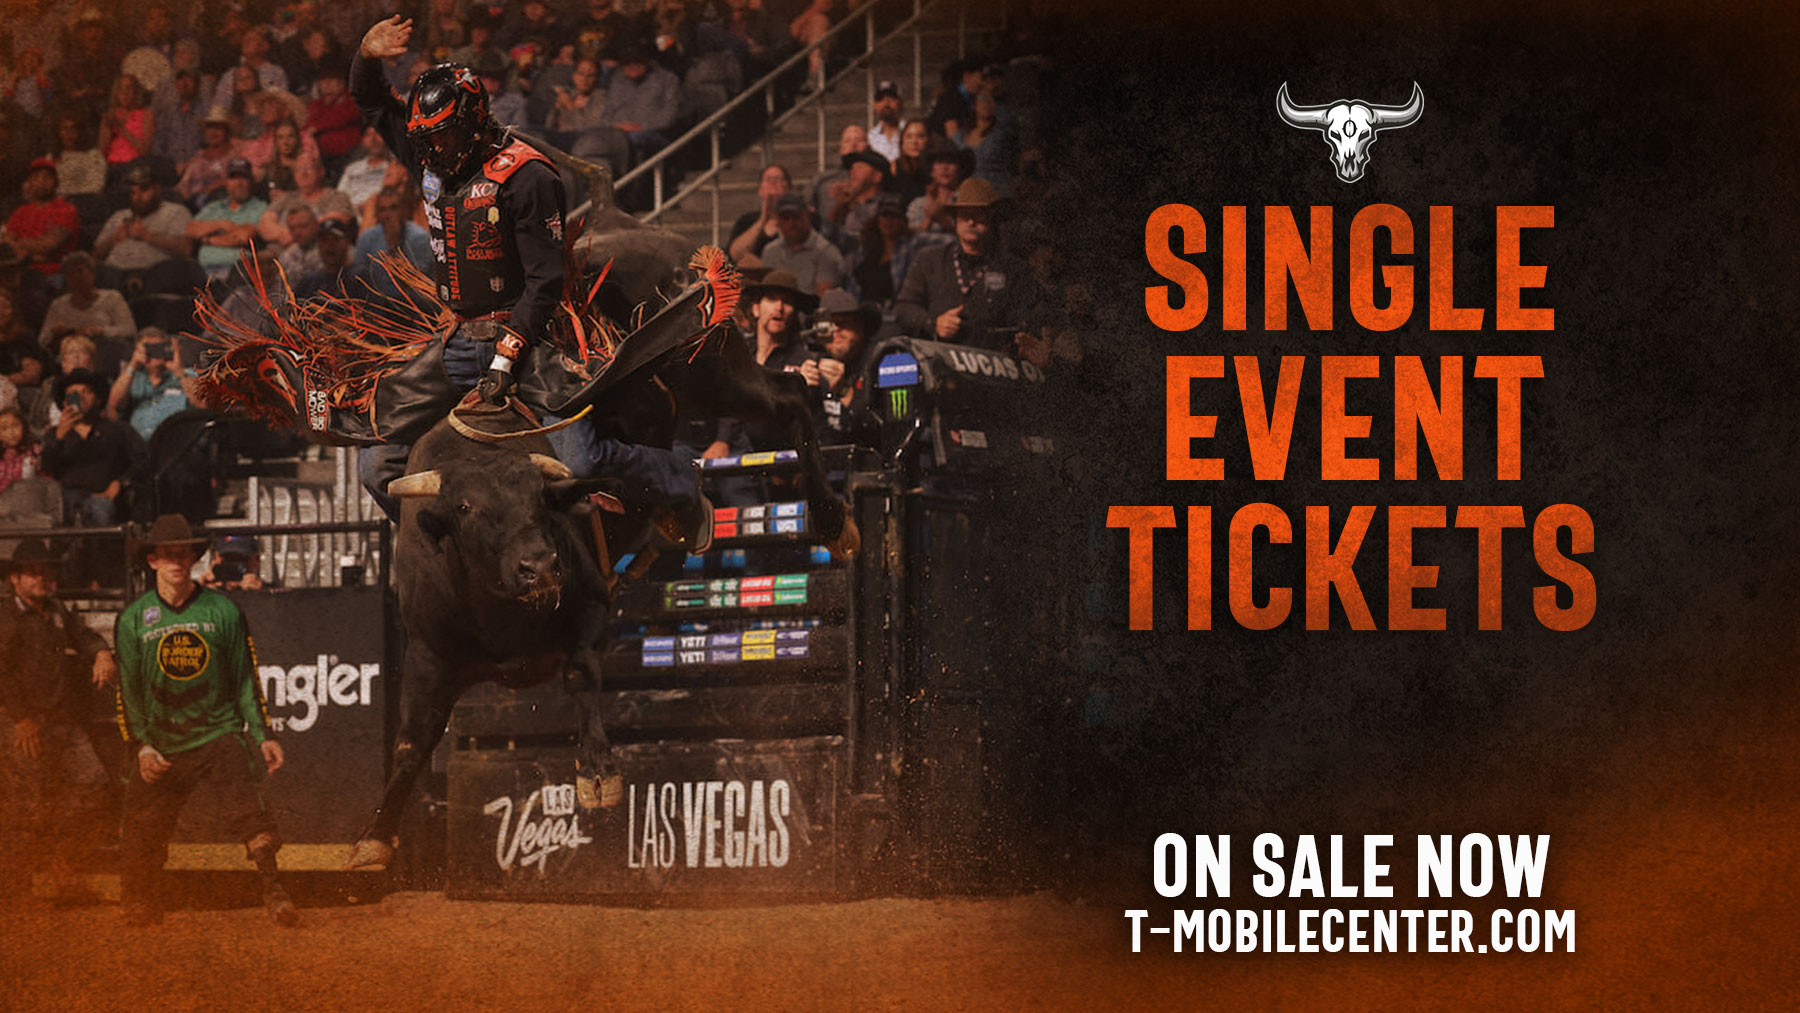 Get Your Tickets to see your Outlaws Today!